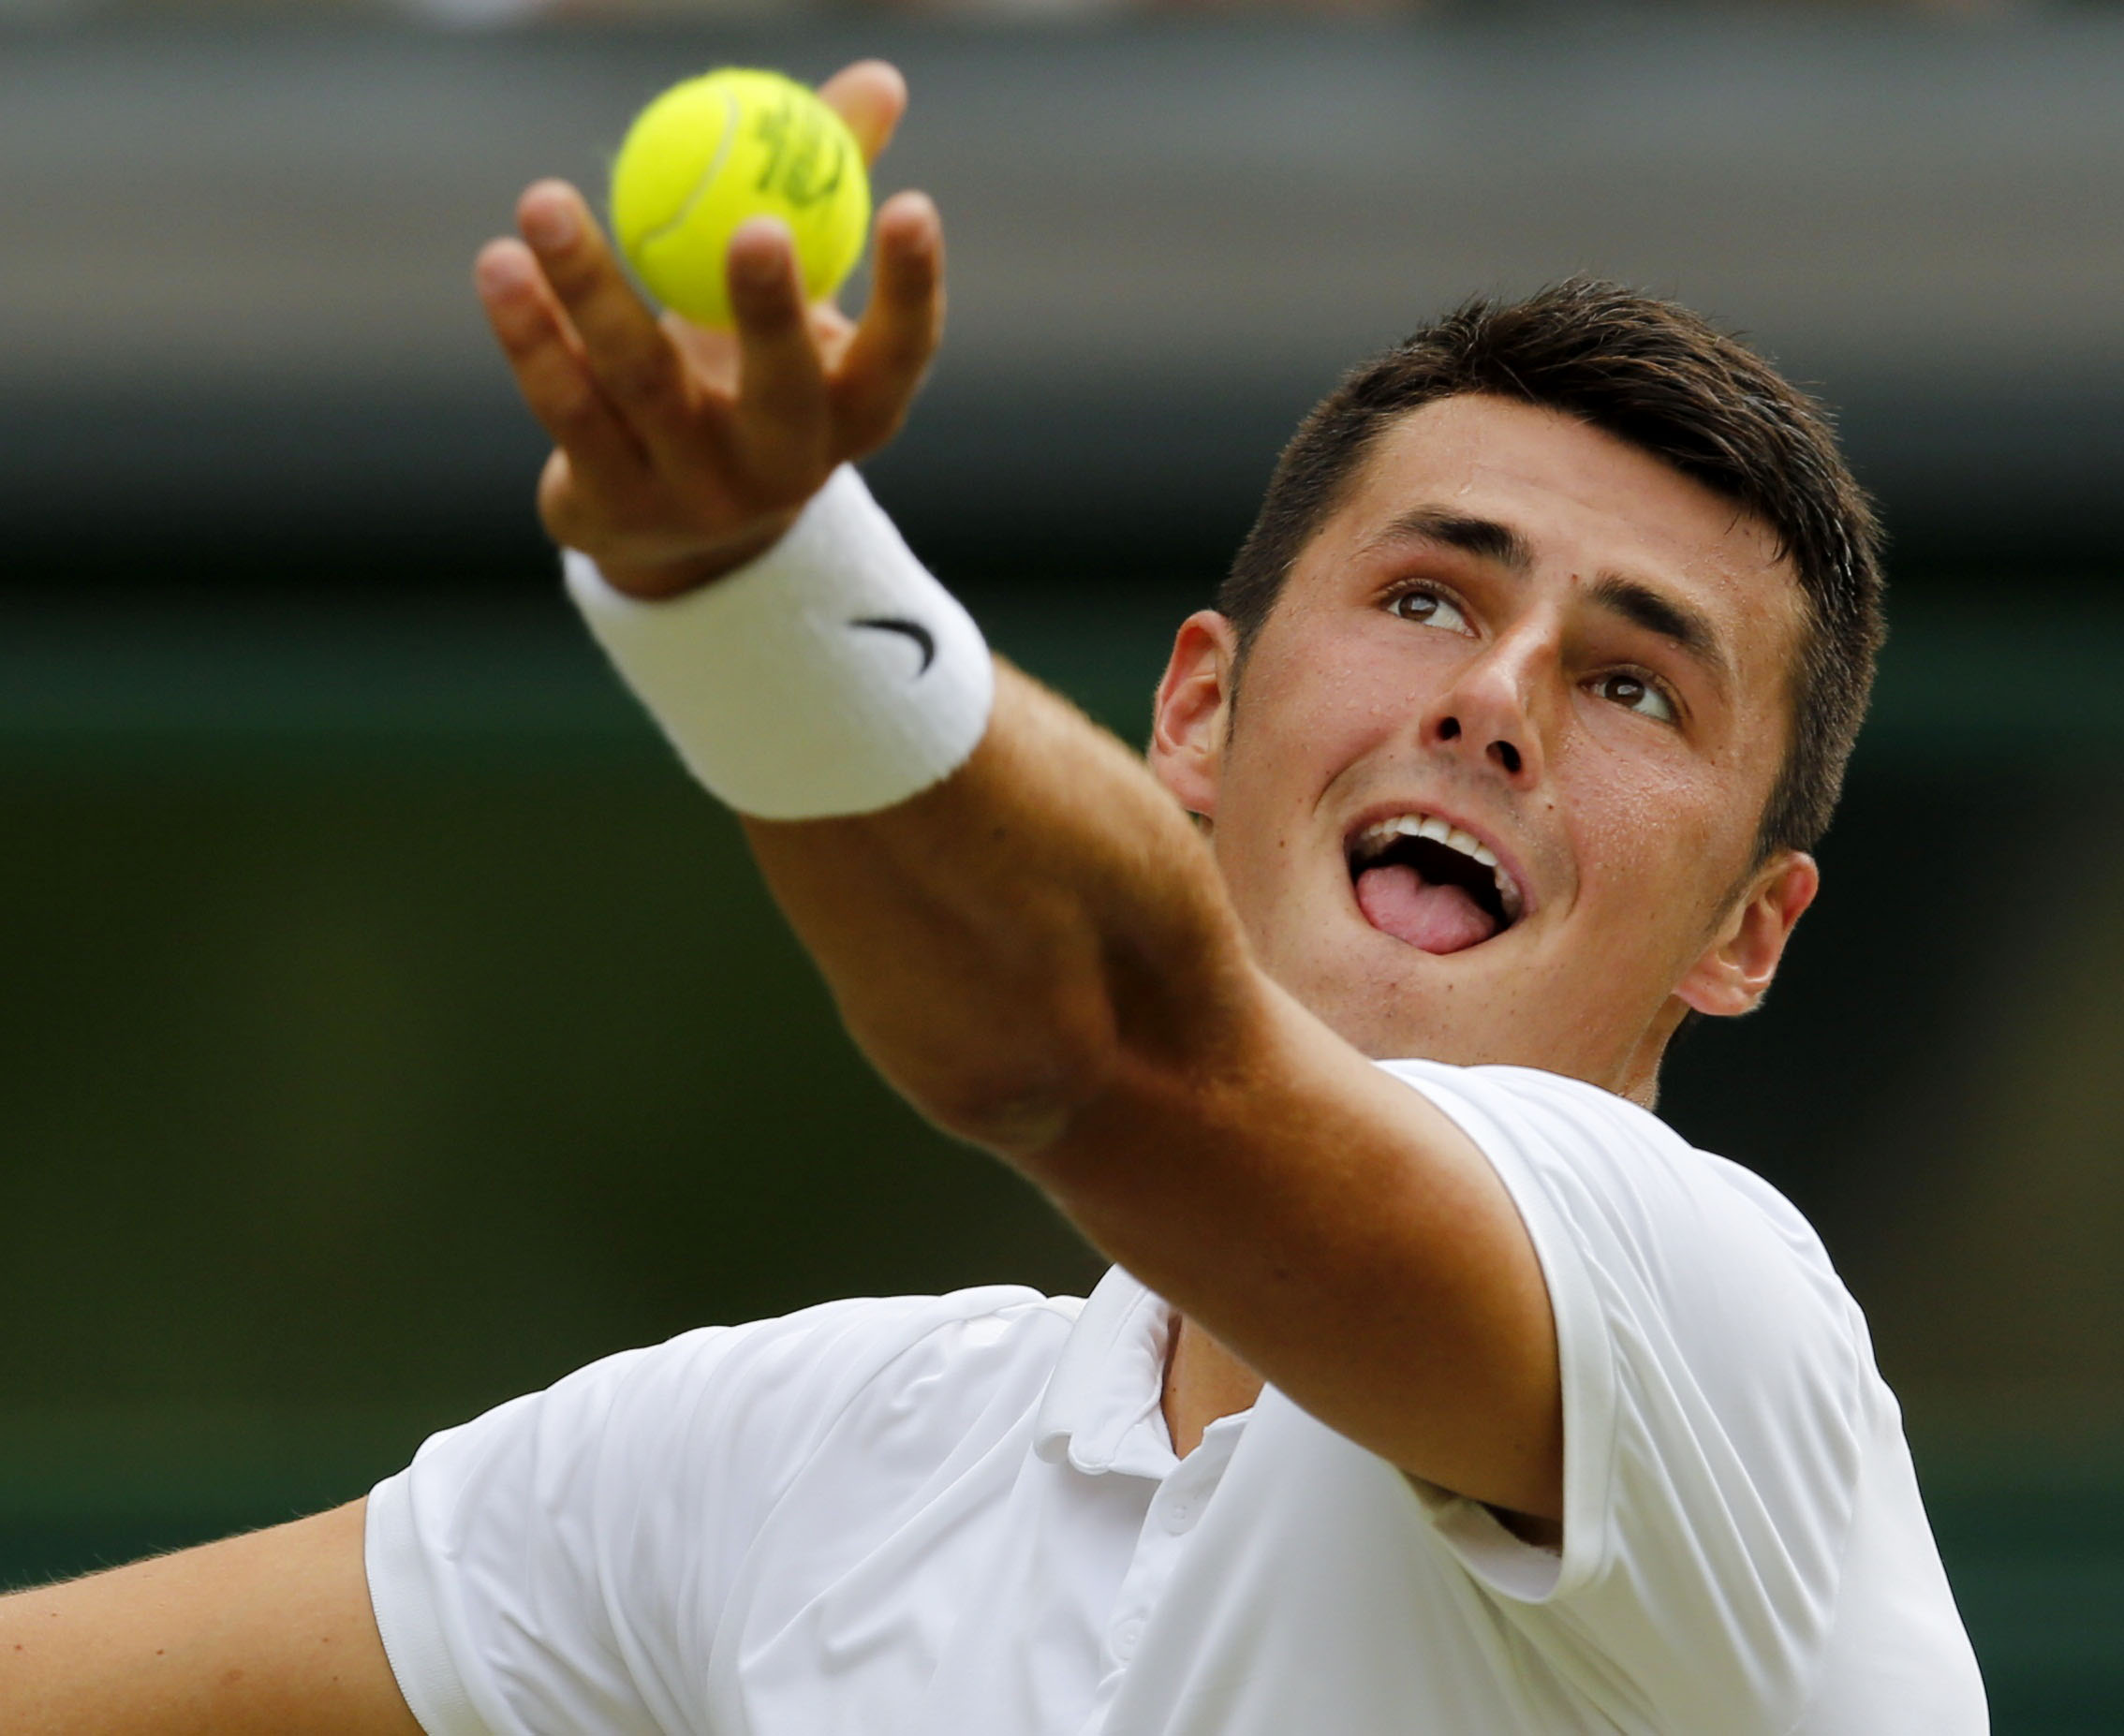 Bernard Tomic serves during his straight-sets loss to Novak Djokovic, but the Aussie saved his best shots for after the match. Photo: Reuters